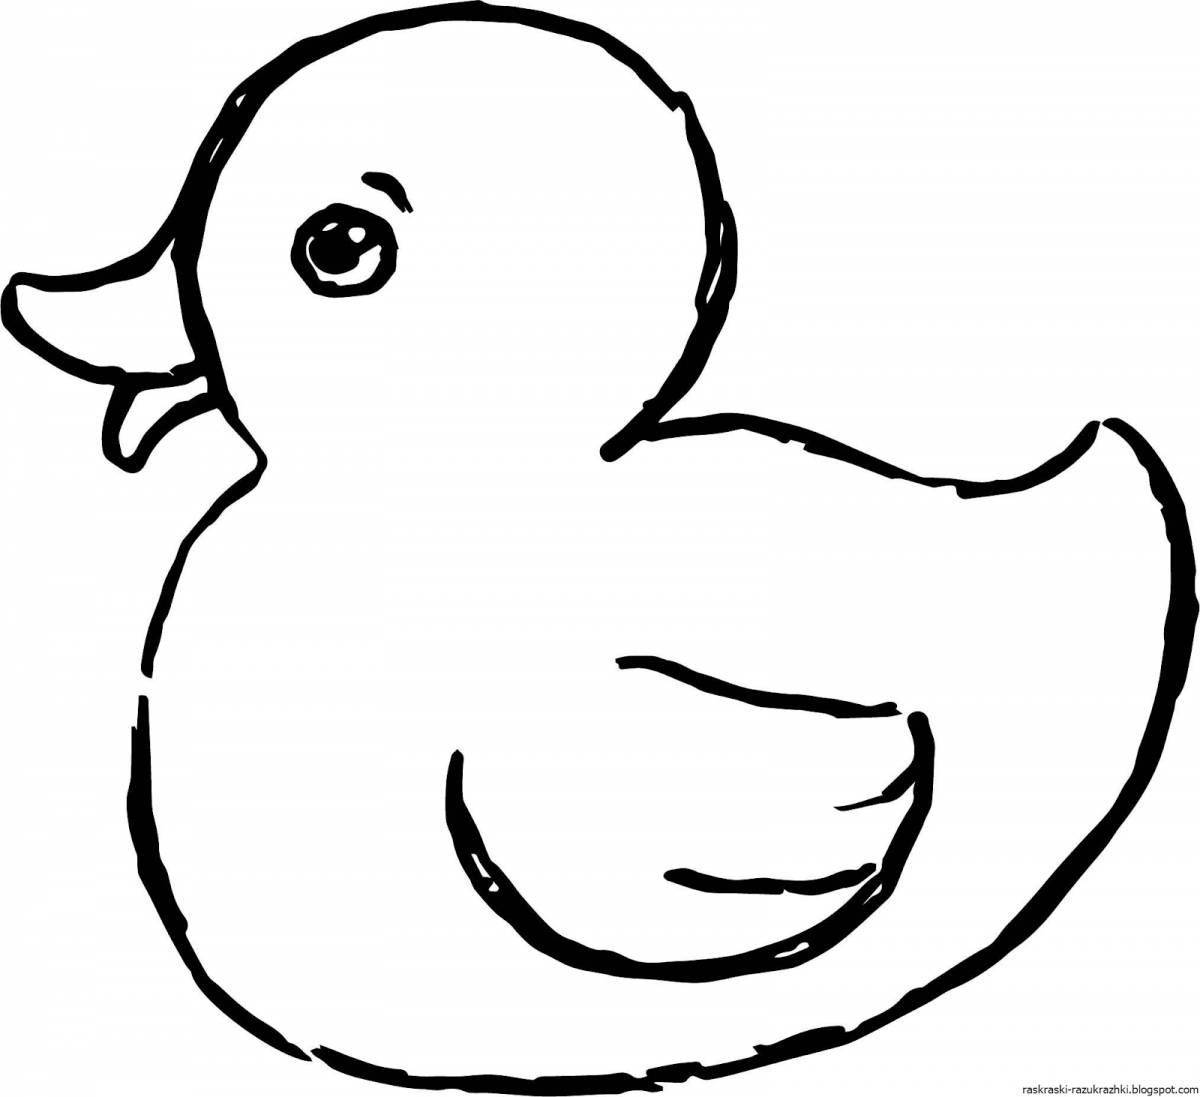 Color-explosion lalafanfan duck coloring page